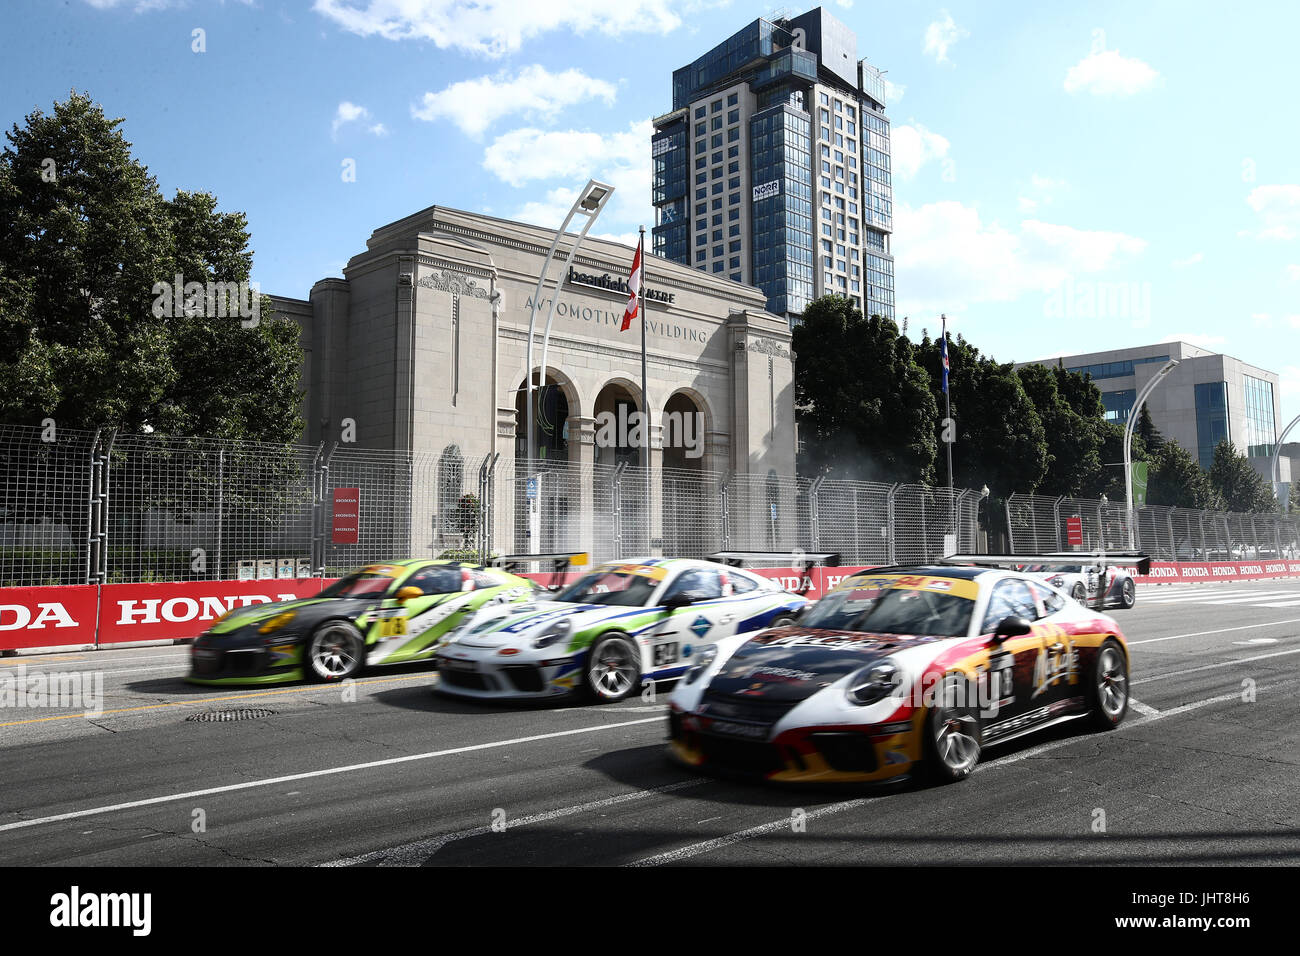 Toronto, Canada. 15th July, 2017. Honda Indy in Toronto was a full day of racing, From Indy to Nascar Pinty's to Porsche Ultra 94 GT3 Cup Challenge Race. There was something to do or watch for the whole family. Luke Durda Alamy/live news Stock Photo